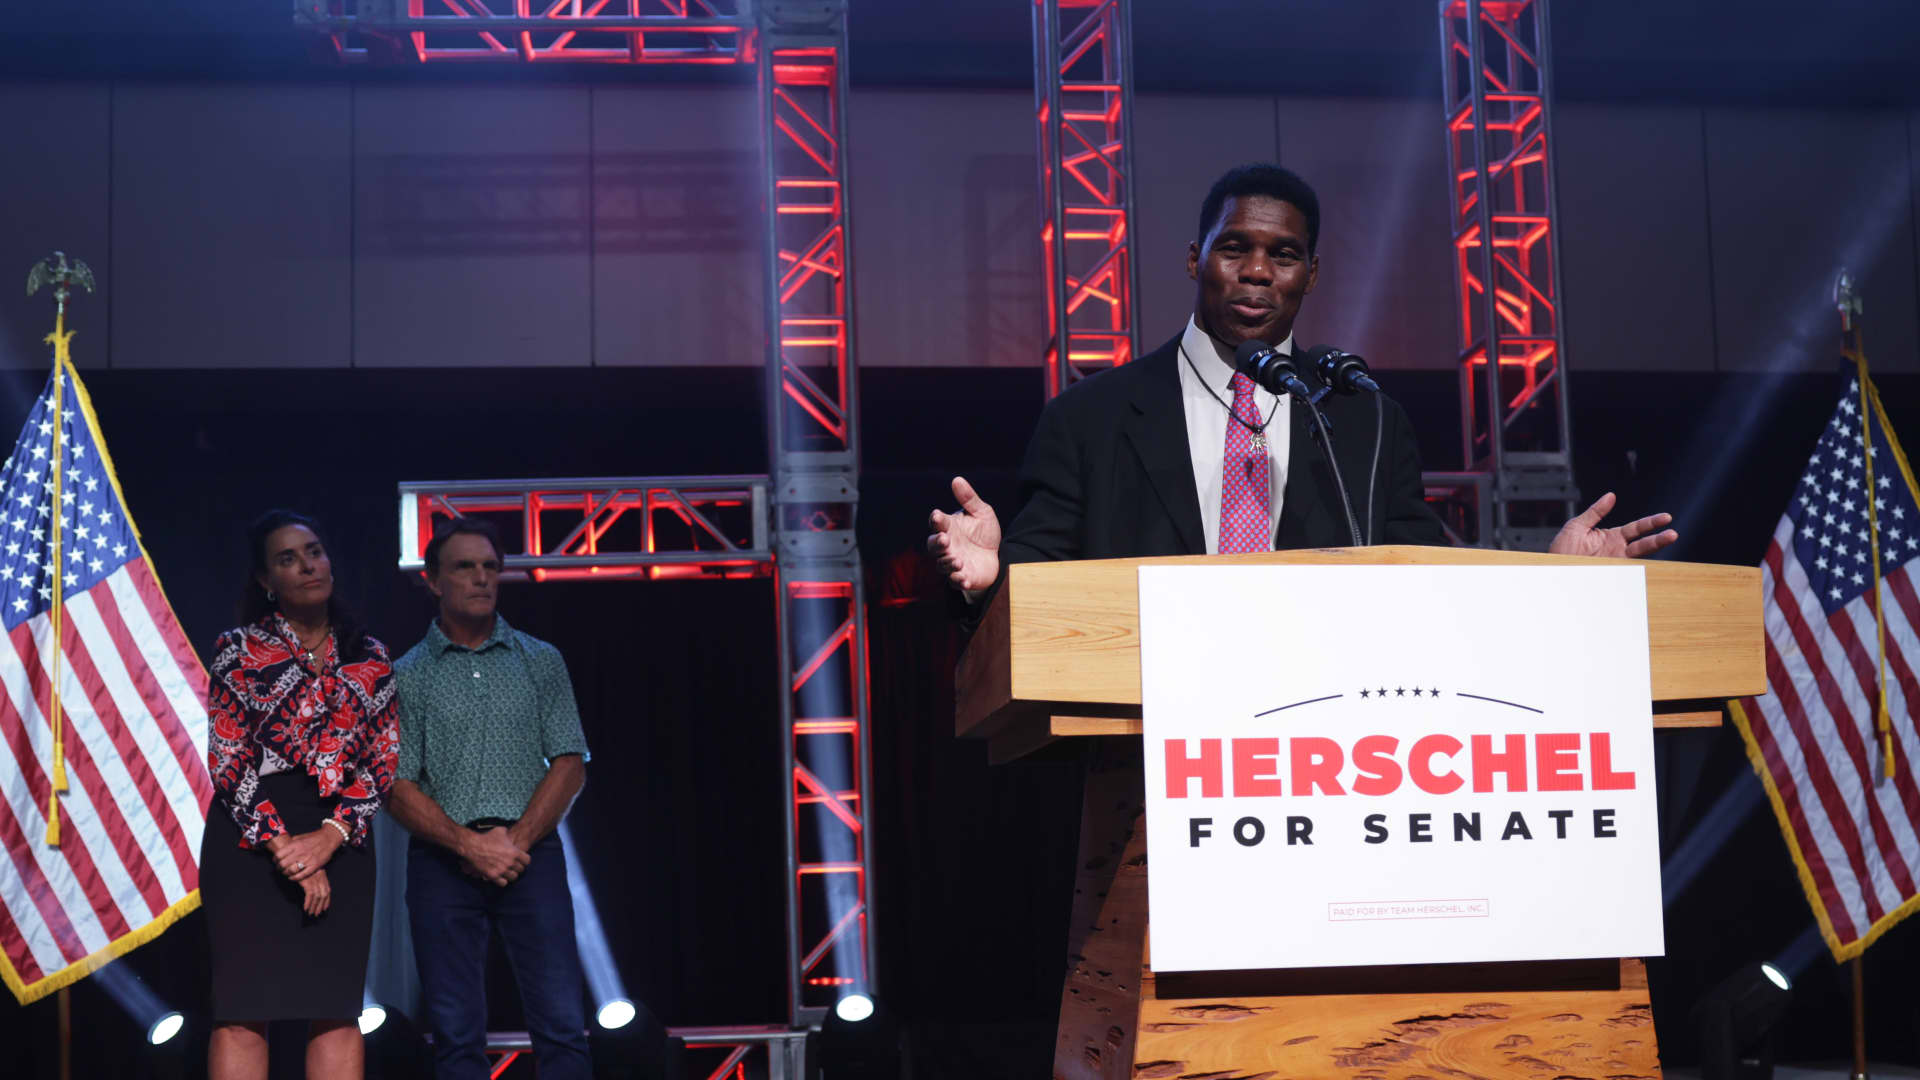 ATLANTA, GEORGIA - DECEMBER 06: Georgia Republican Senate candidate Herschel Walker delivers his concession speech as his wife Julie Blanchard and former football player Doug Flutie look on during an election night event at the College Football Hall of Fame on December 6, 2022 in Atlanta, Georgia. Tonight Walker lost his runoff election to incumbent Sen. Raphael Warnock (D-GA). (Photo by Alex Wong/Getty Images)